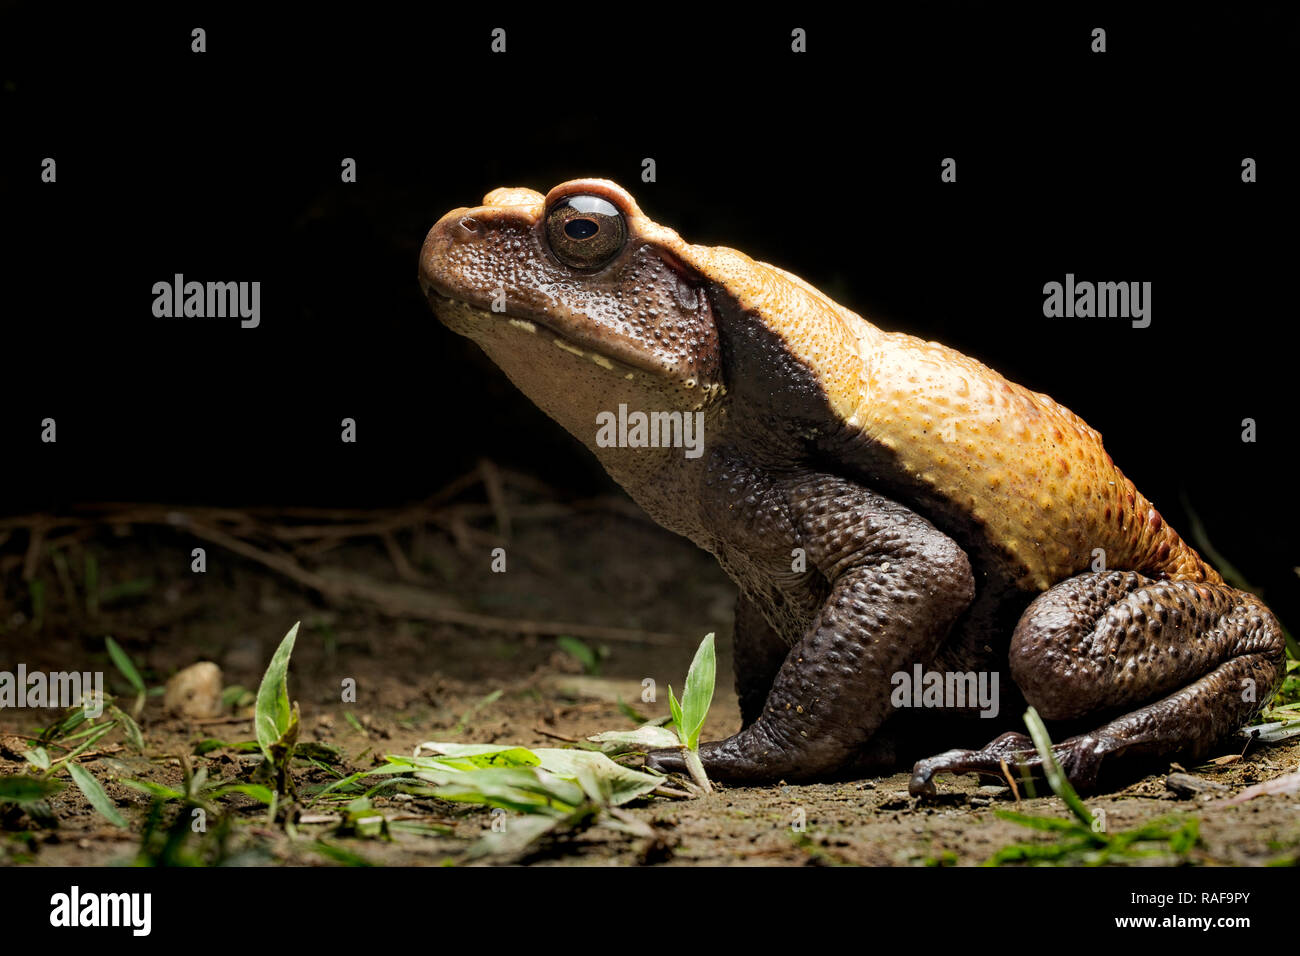 big tropical rain forest toad, Rhaebo blombergi from the tropical jungle of Colombia. An endangered species in need of nature conservation. Stock Photo